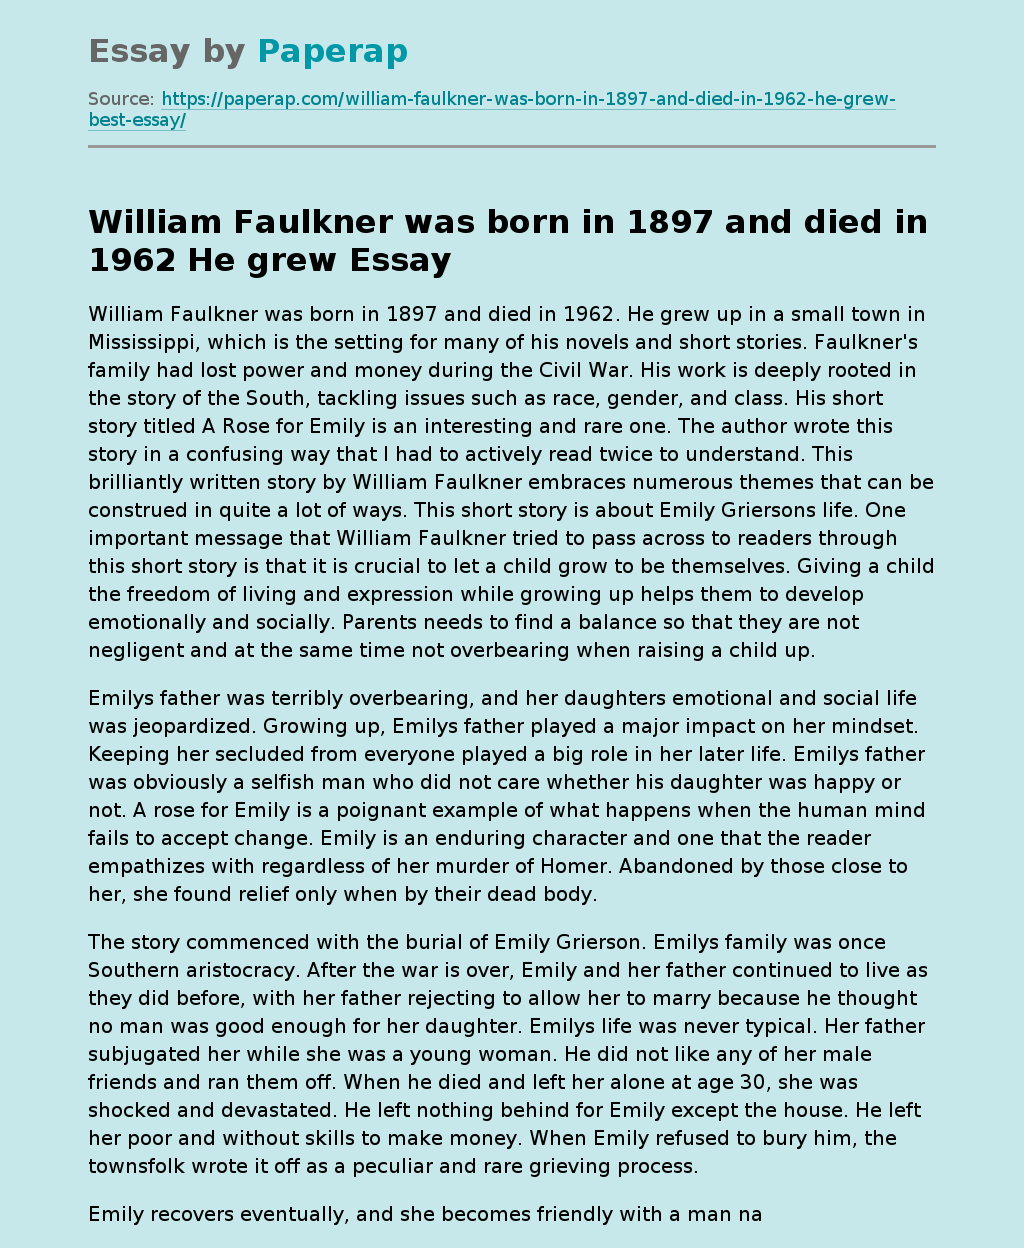 "A Rose for Emily" - Story by William Faulkner